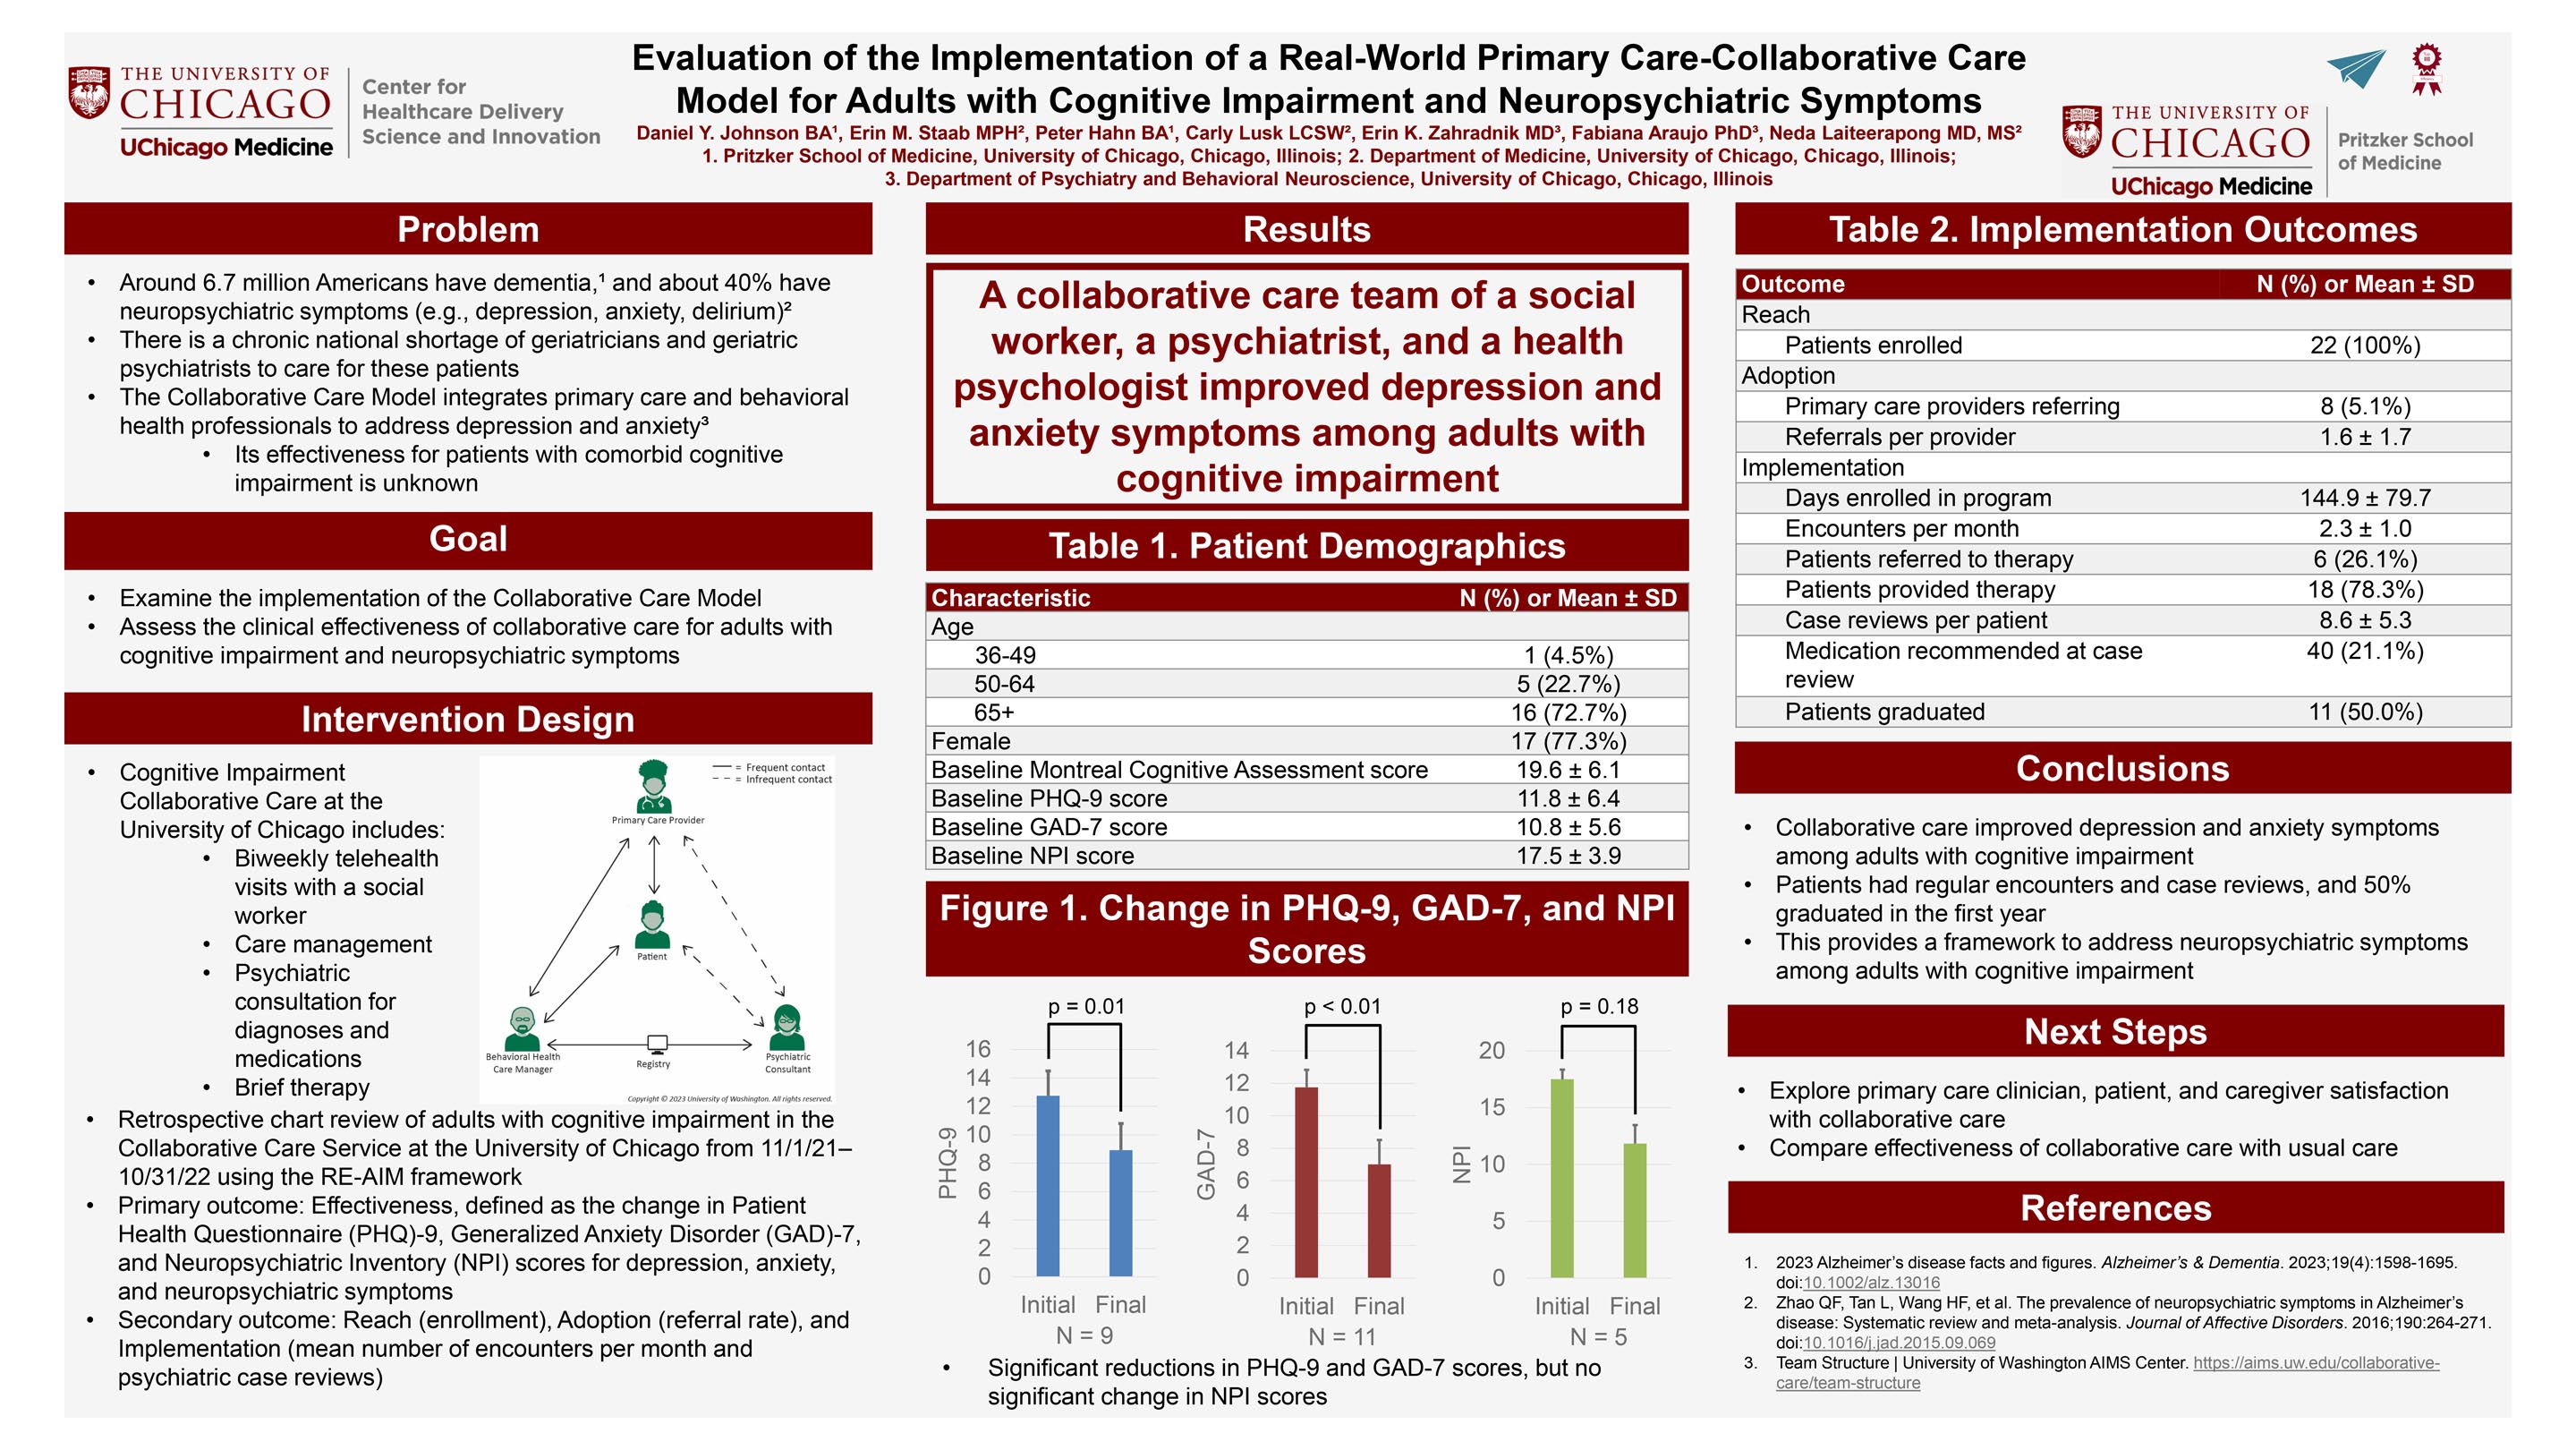 JOHNSON_Evaluation of the Implementation of a Real-World Primary Care-Collaborative Care Model